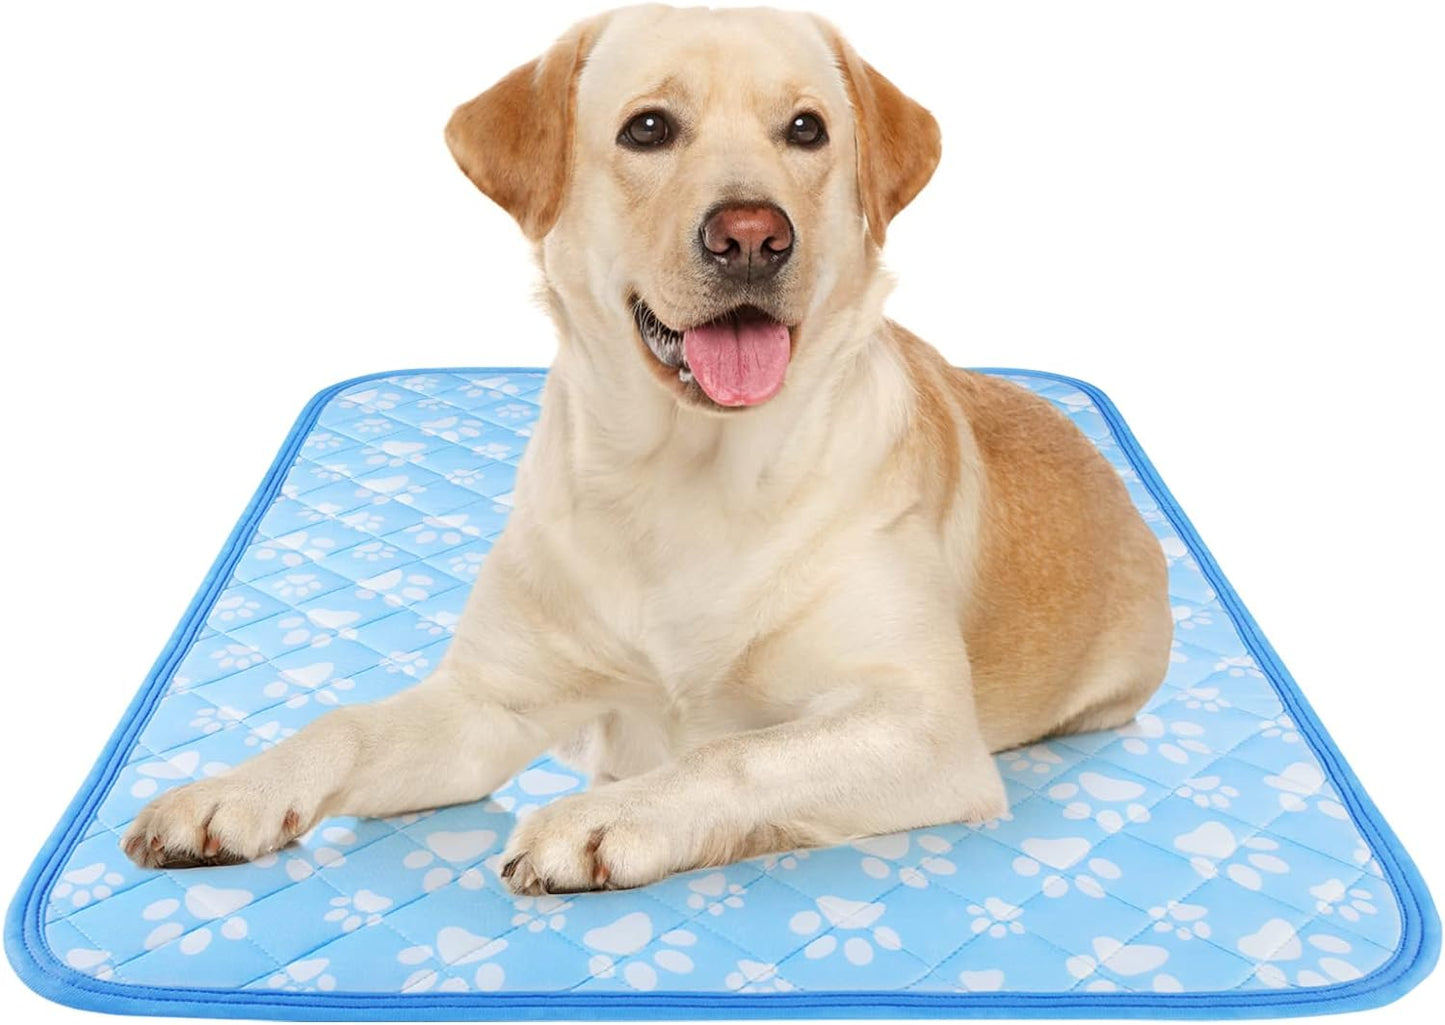 Large dog cooling mat - as cool as lying on a cloud